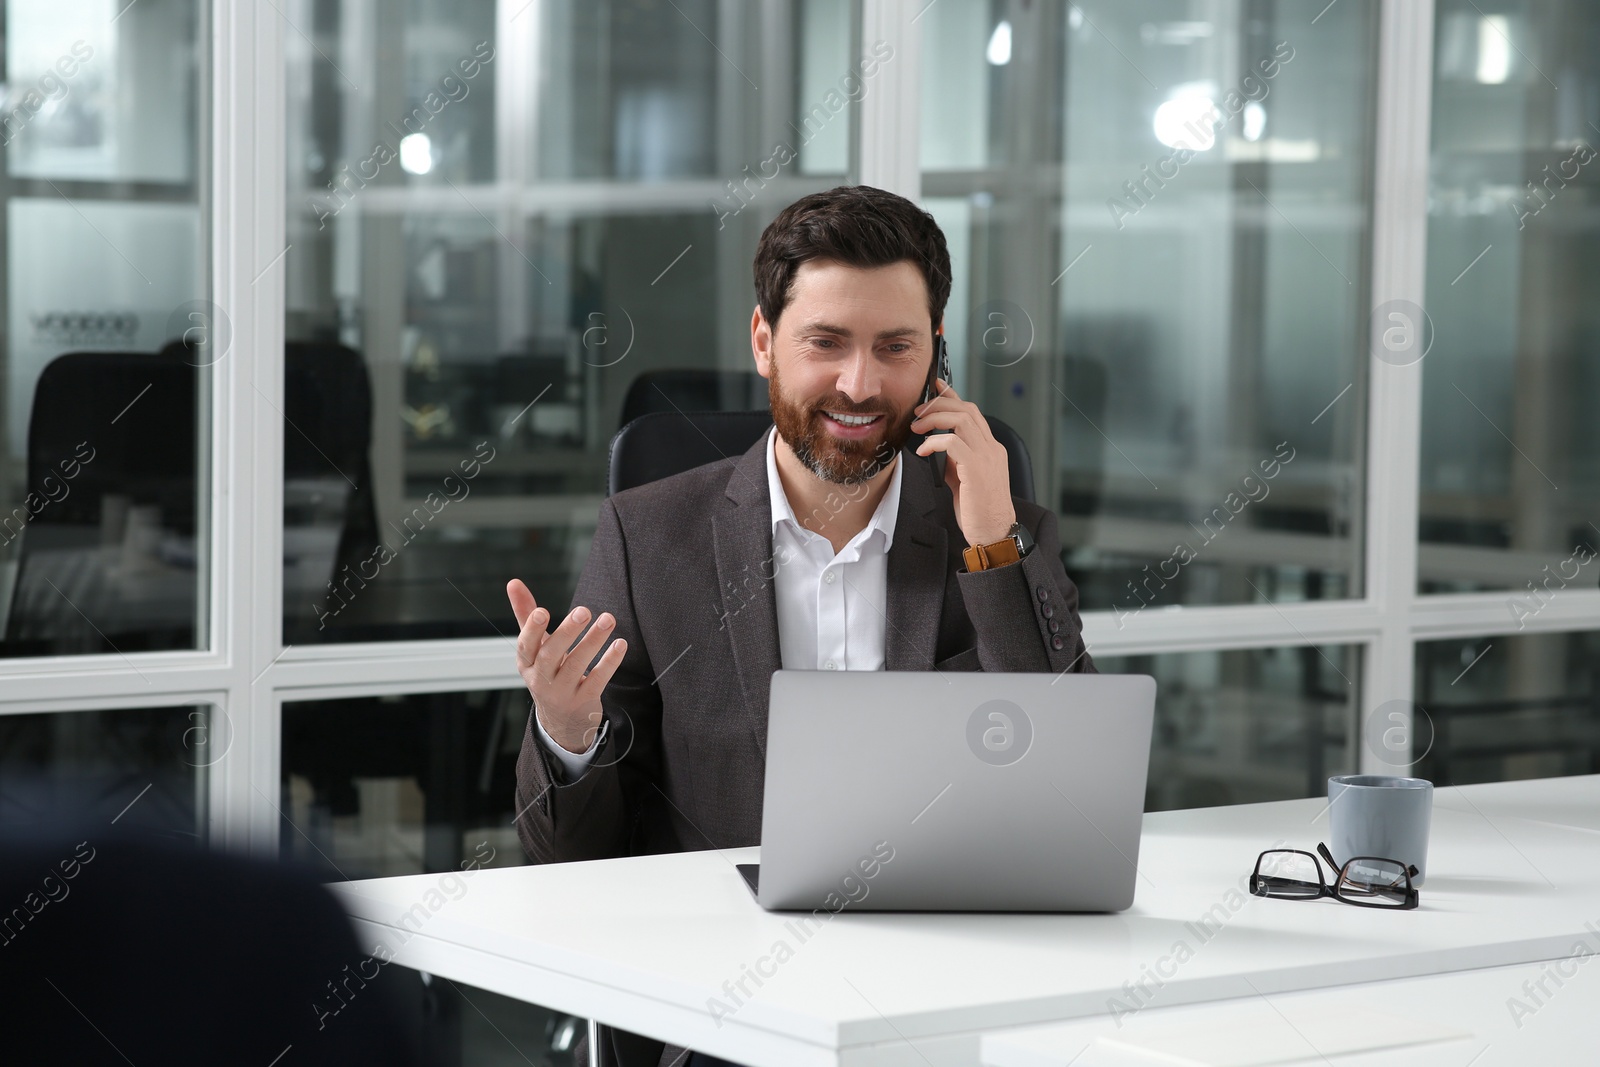 Photo of Man talking on phone while working with laptop at white desk in office